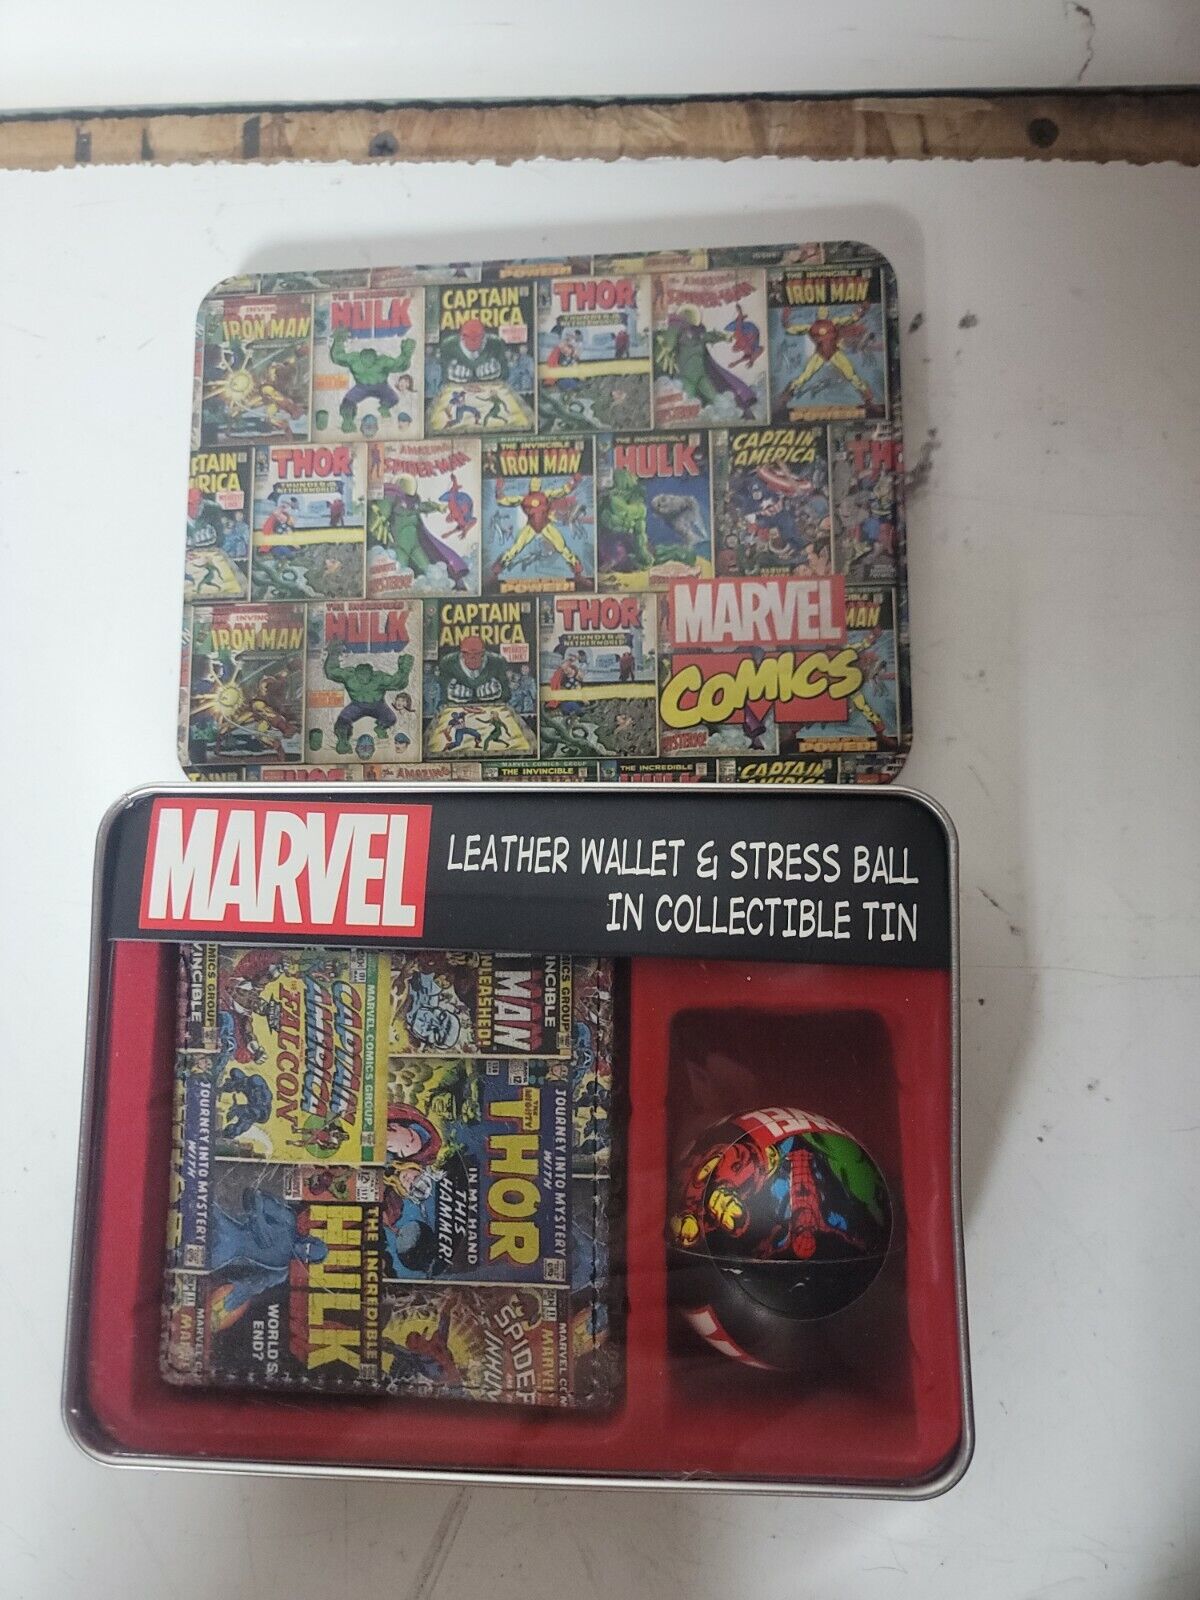 Marvel Comics Bi-fold Leather Wallet & Stress Ball in Collector Tin NEW